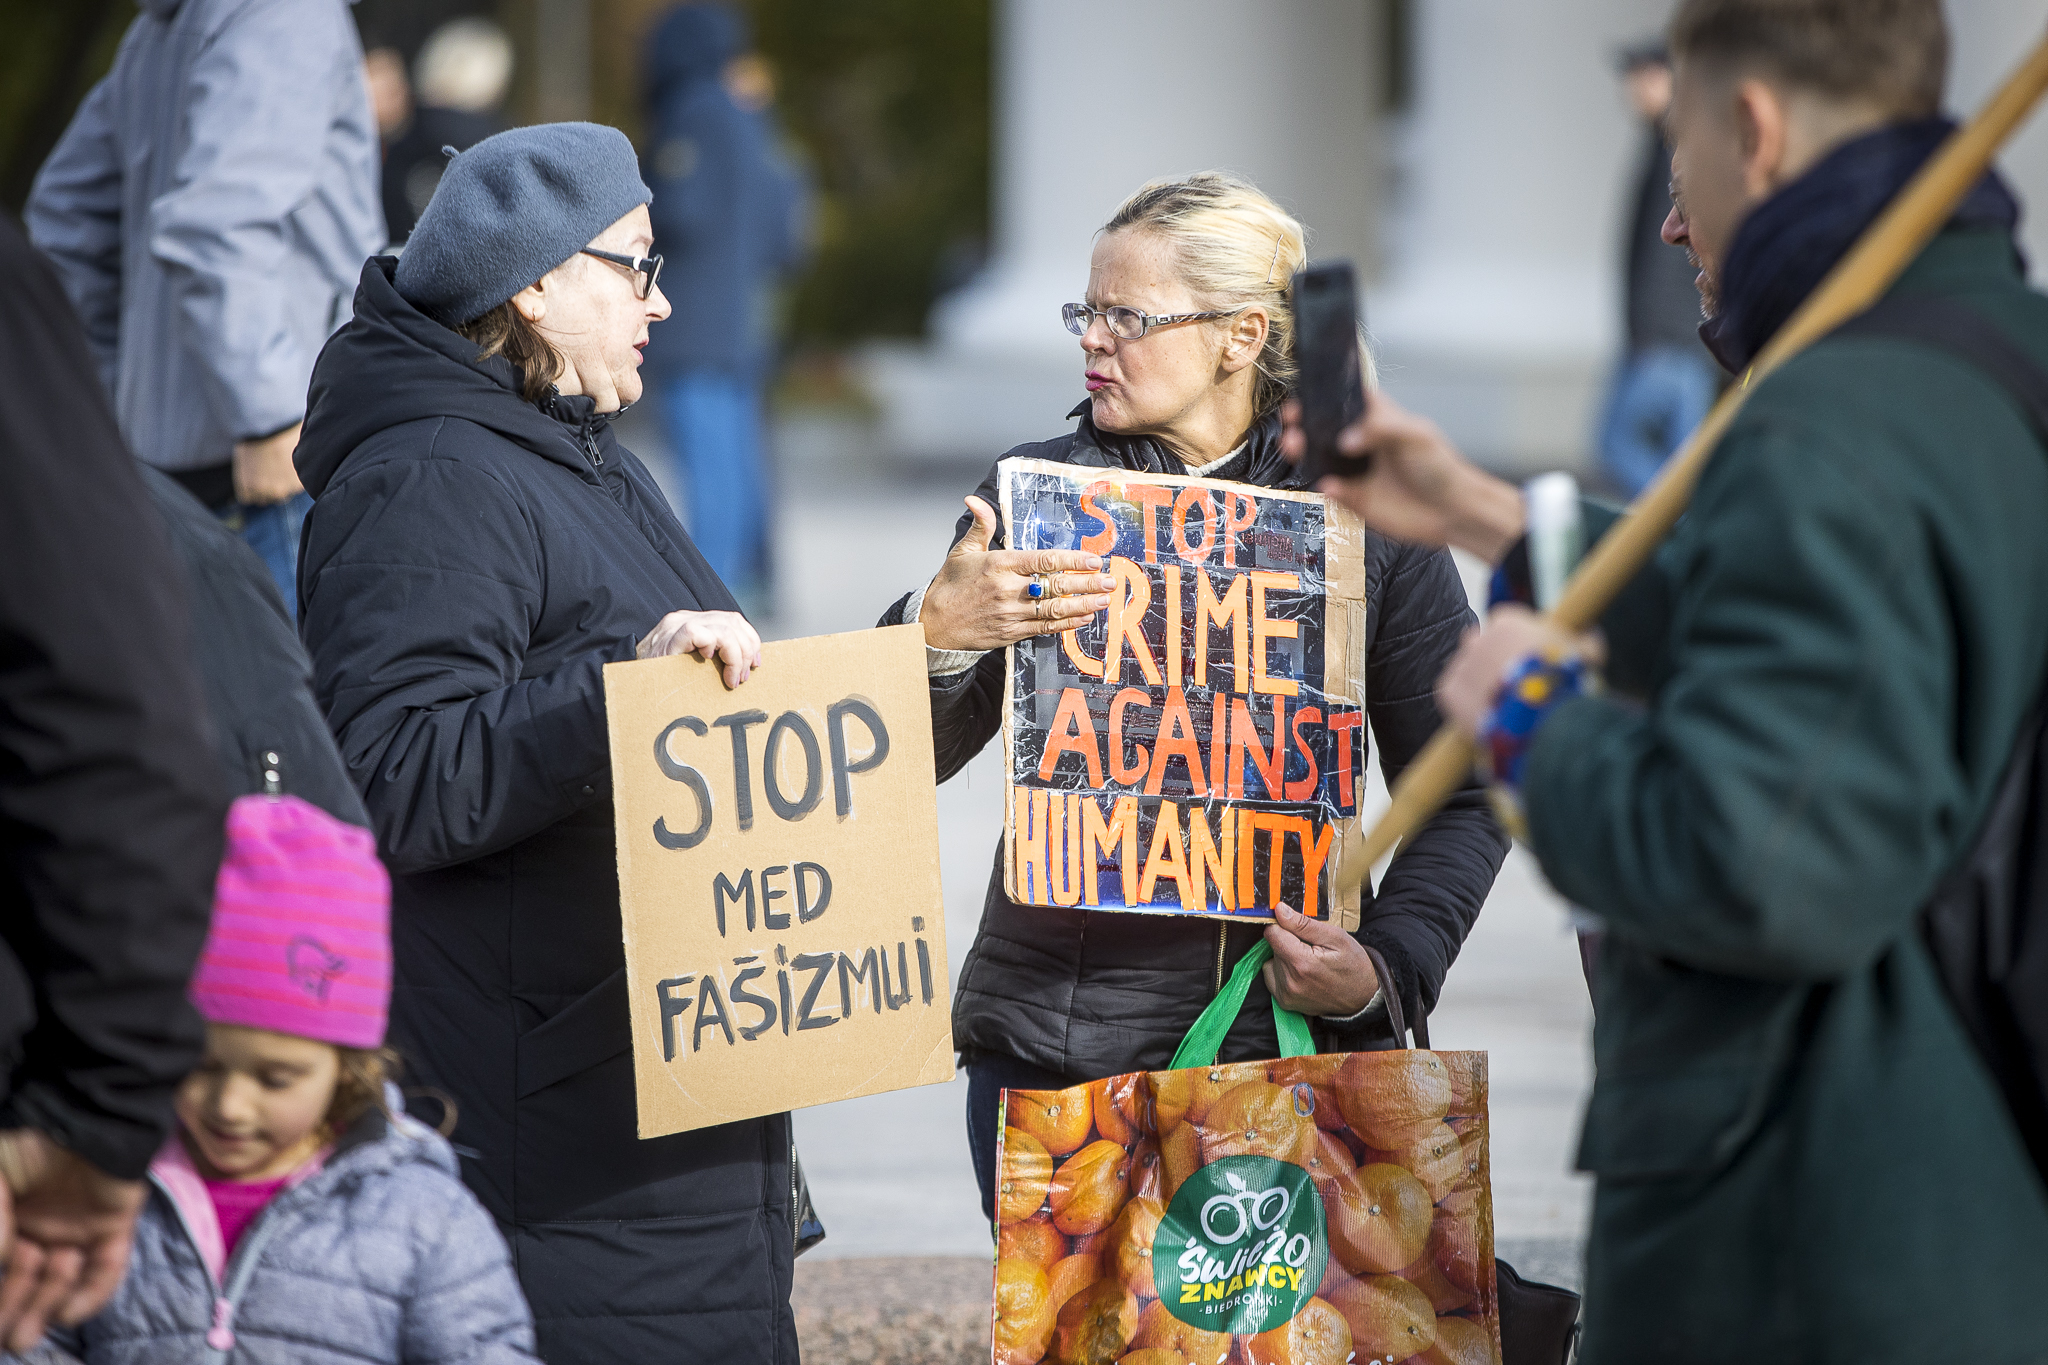 On 2021/10/16, AGAstrauskaitė called for a protest against the government's alleged repressive policy. in 2021 October 16